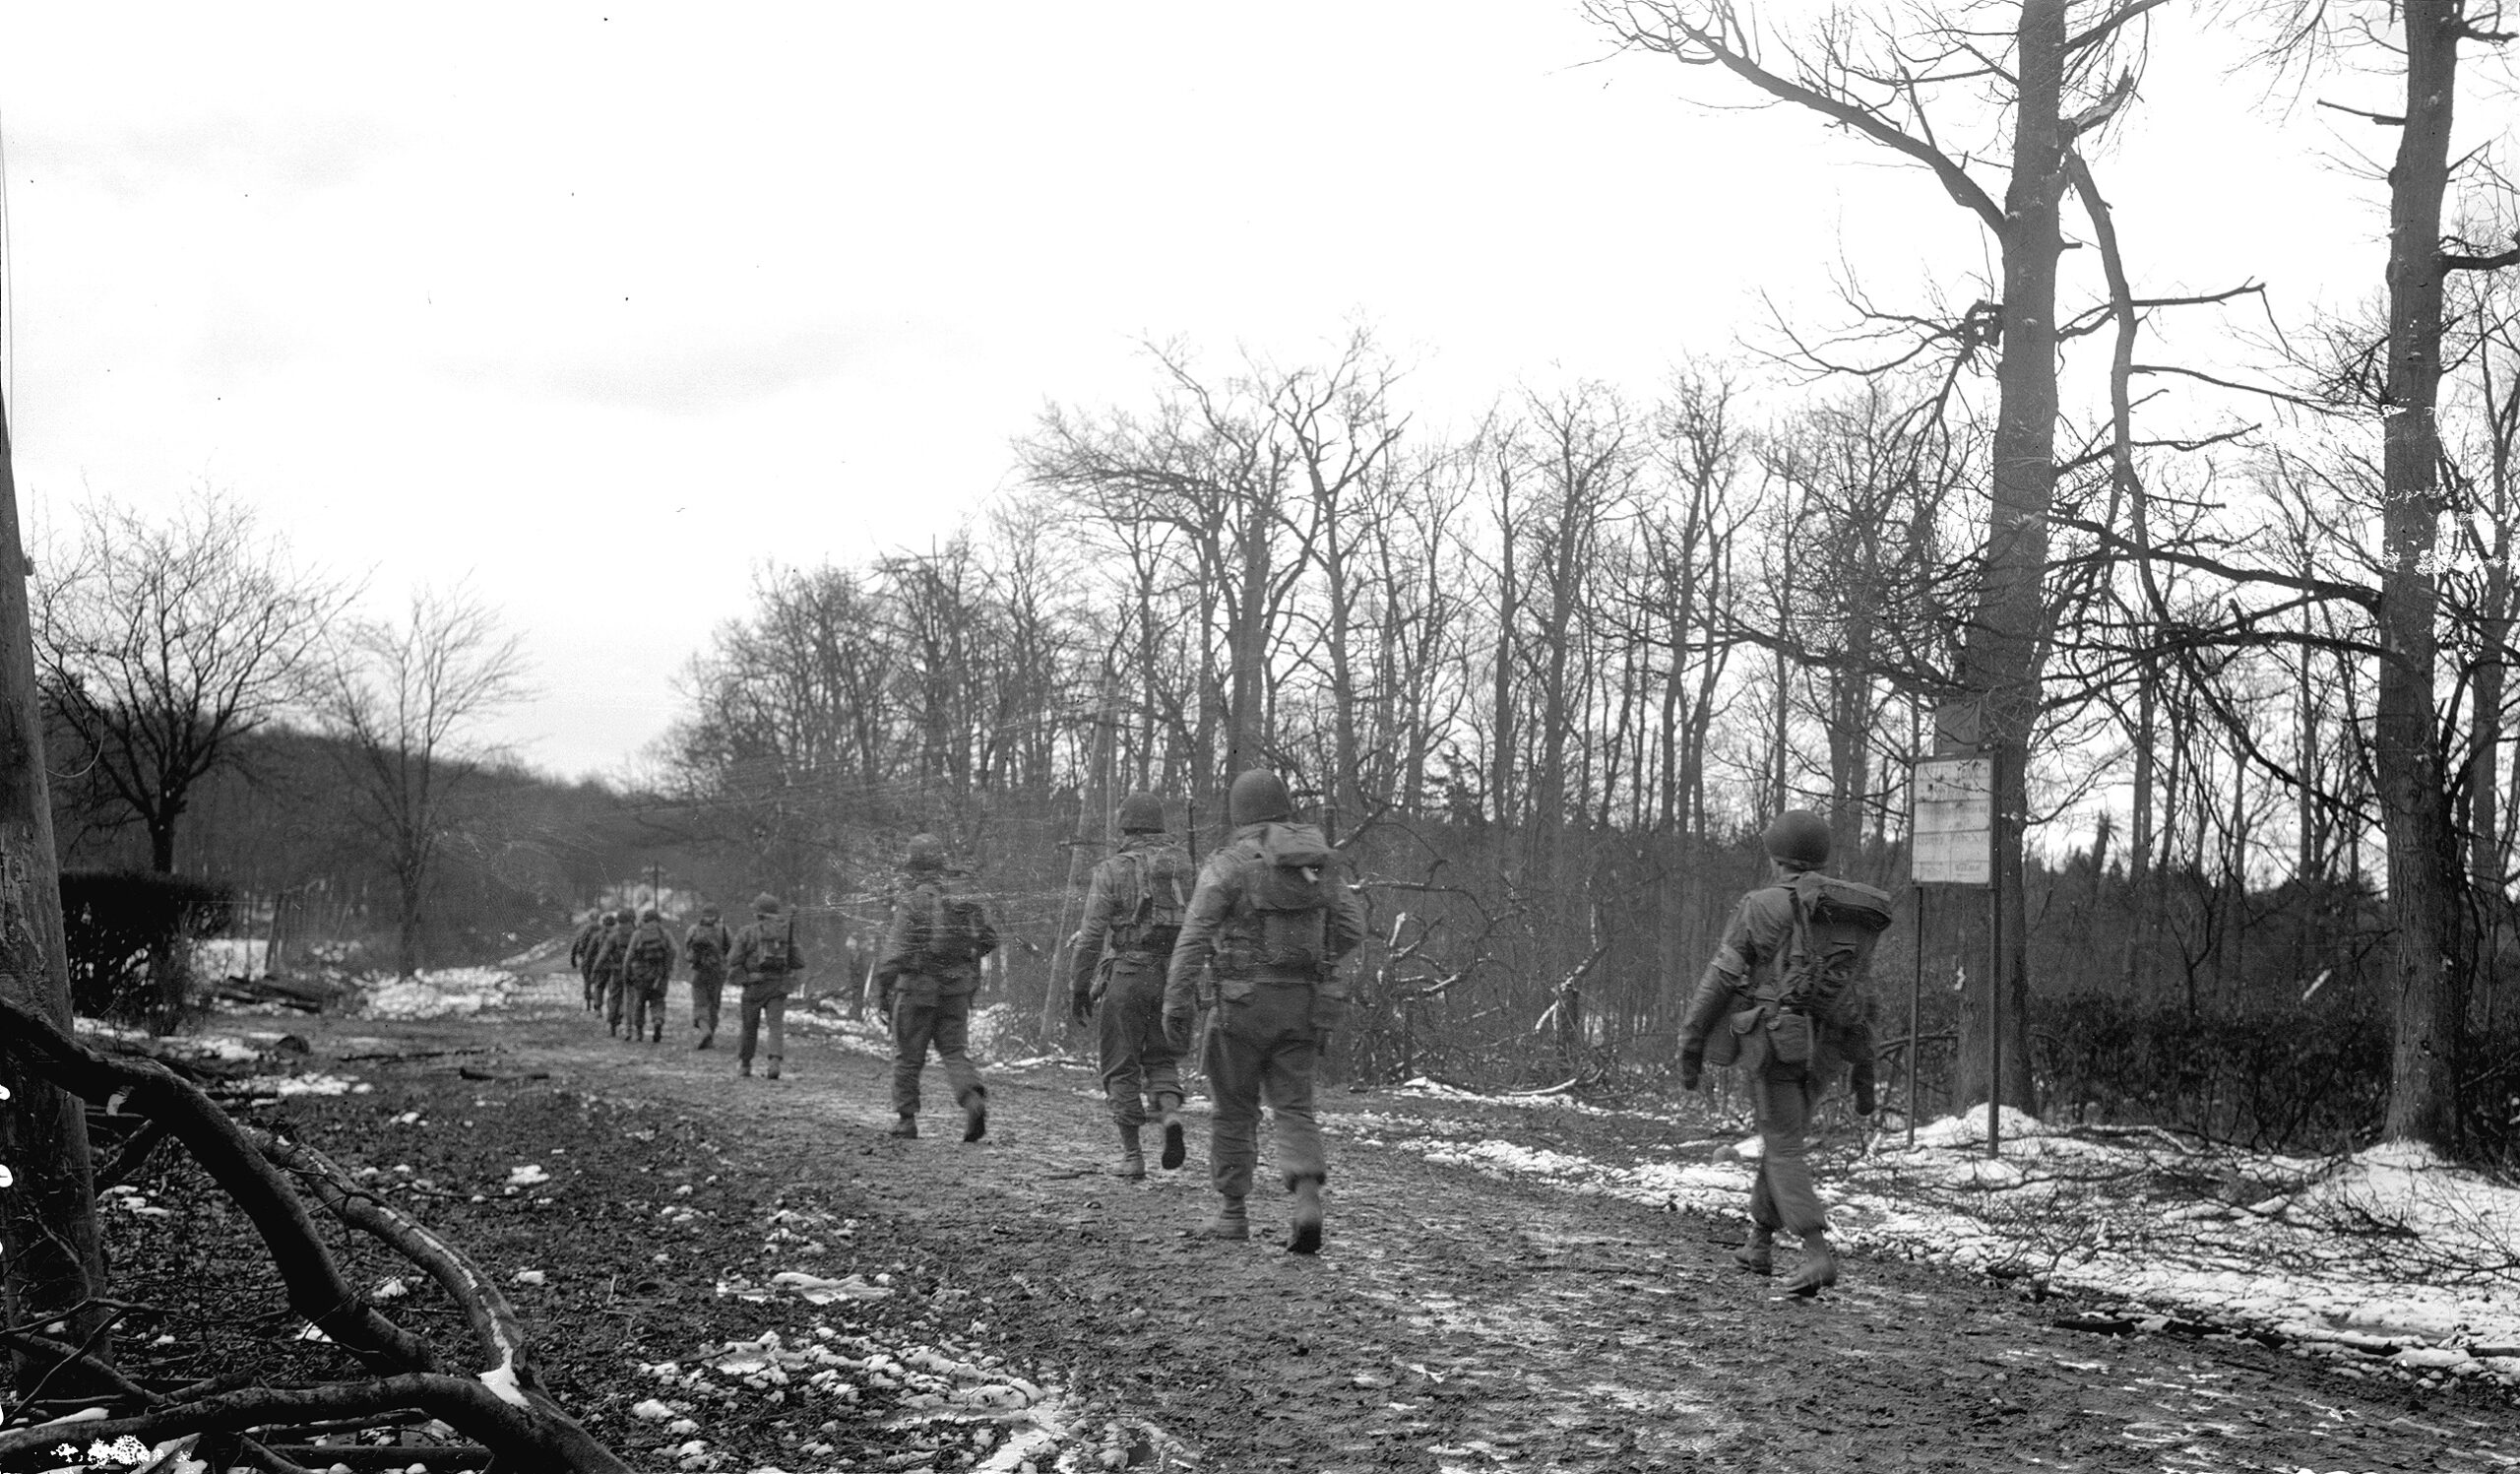 Soldiers of the 2nd Ranger Battalion slog their way along a muddy road in the Hürtgen Forest. These Rangers are on their way to Hill 400, the scene of a fierce stand against repeated German attacks.